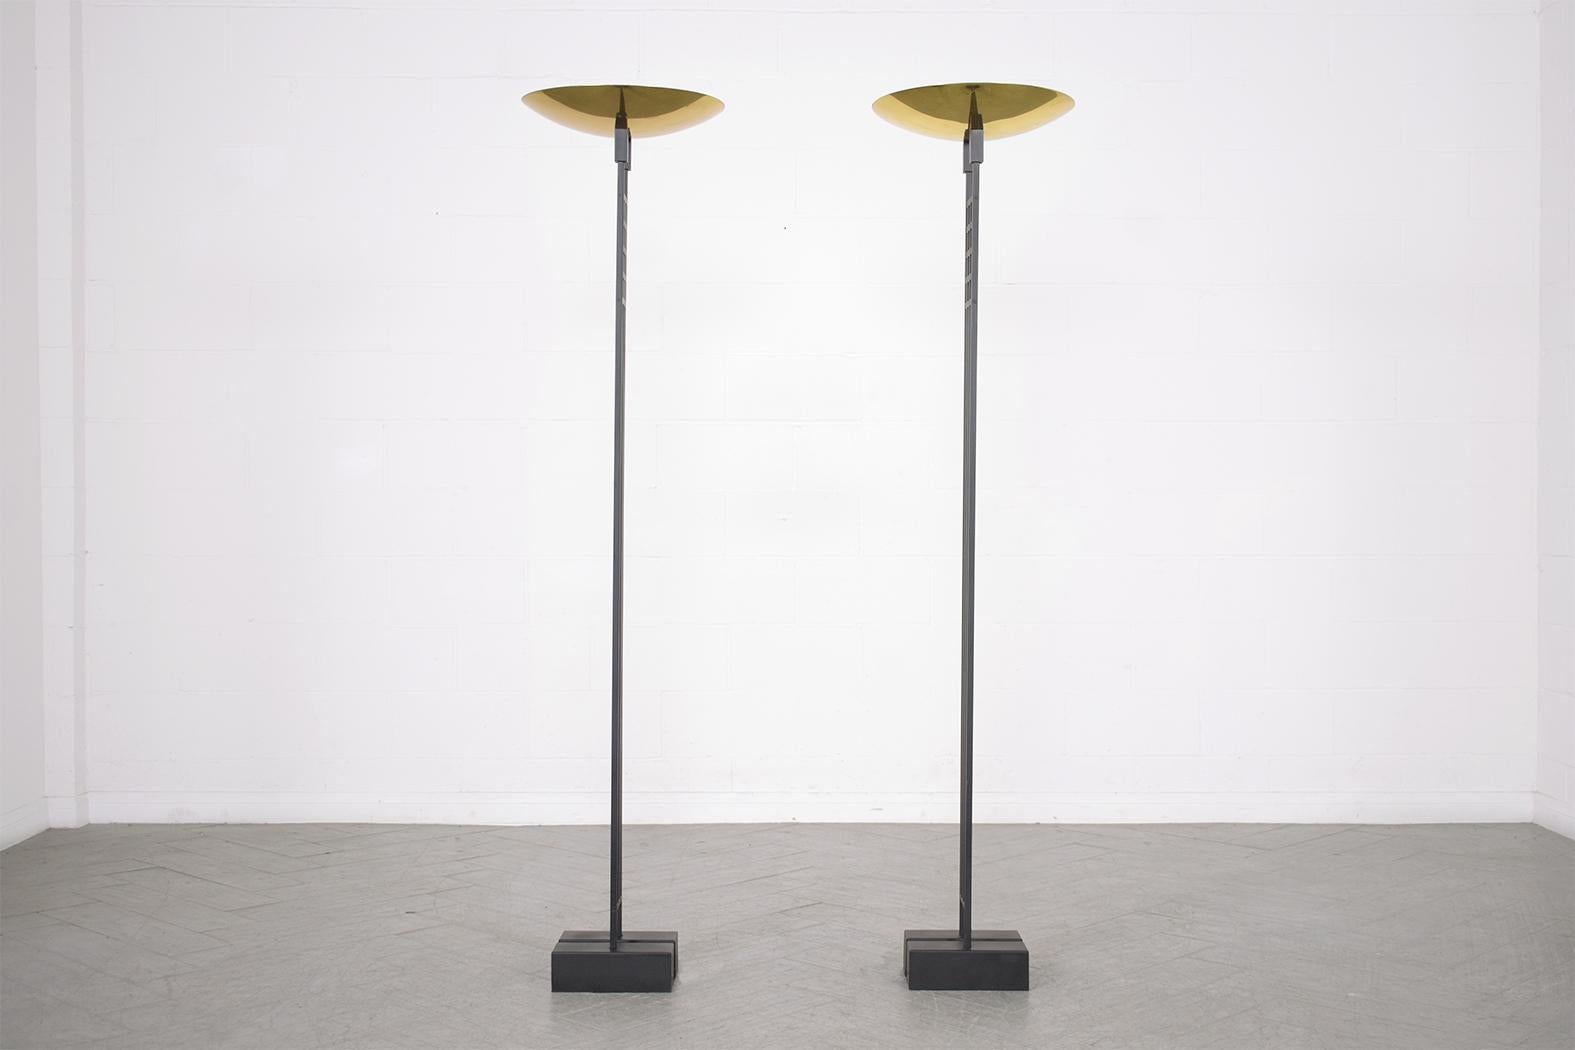 1980s Vintage Brass & Metal Floor Lamps: Restored Mid-Century Modern Design In Good Condition For Sale In Los Angeles, CA